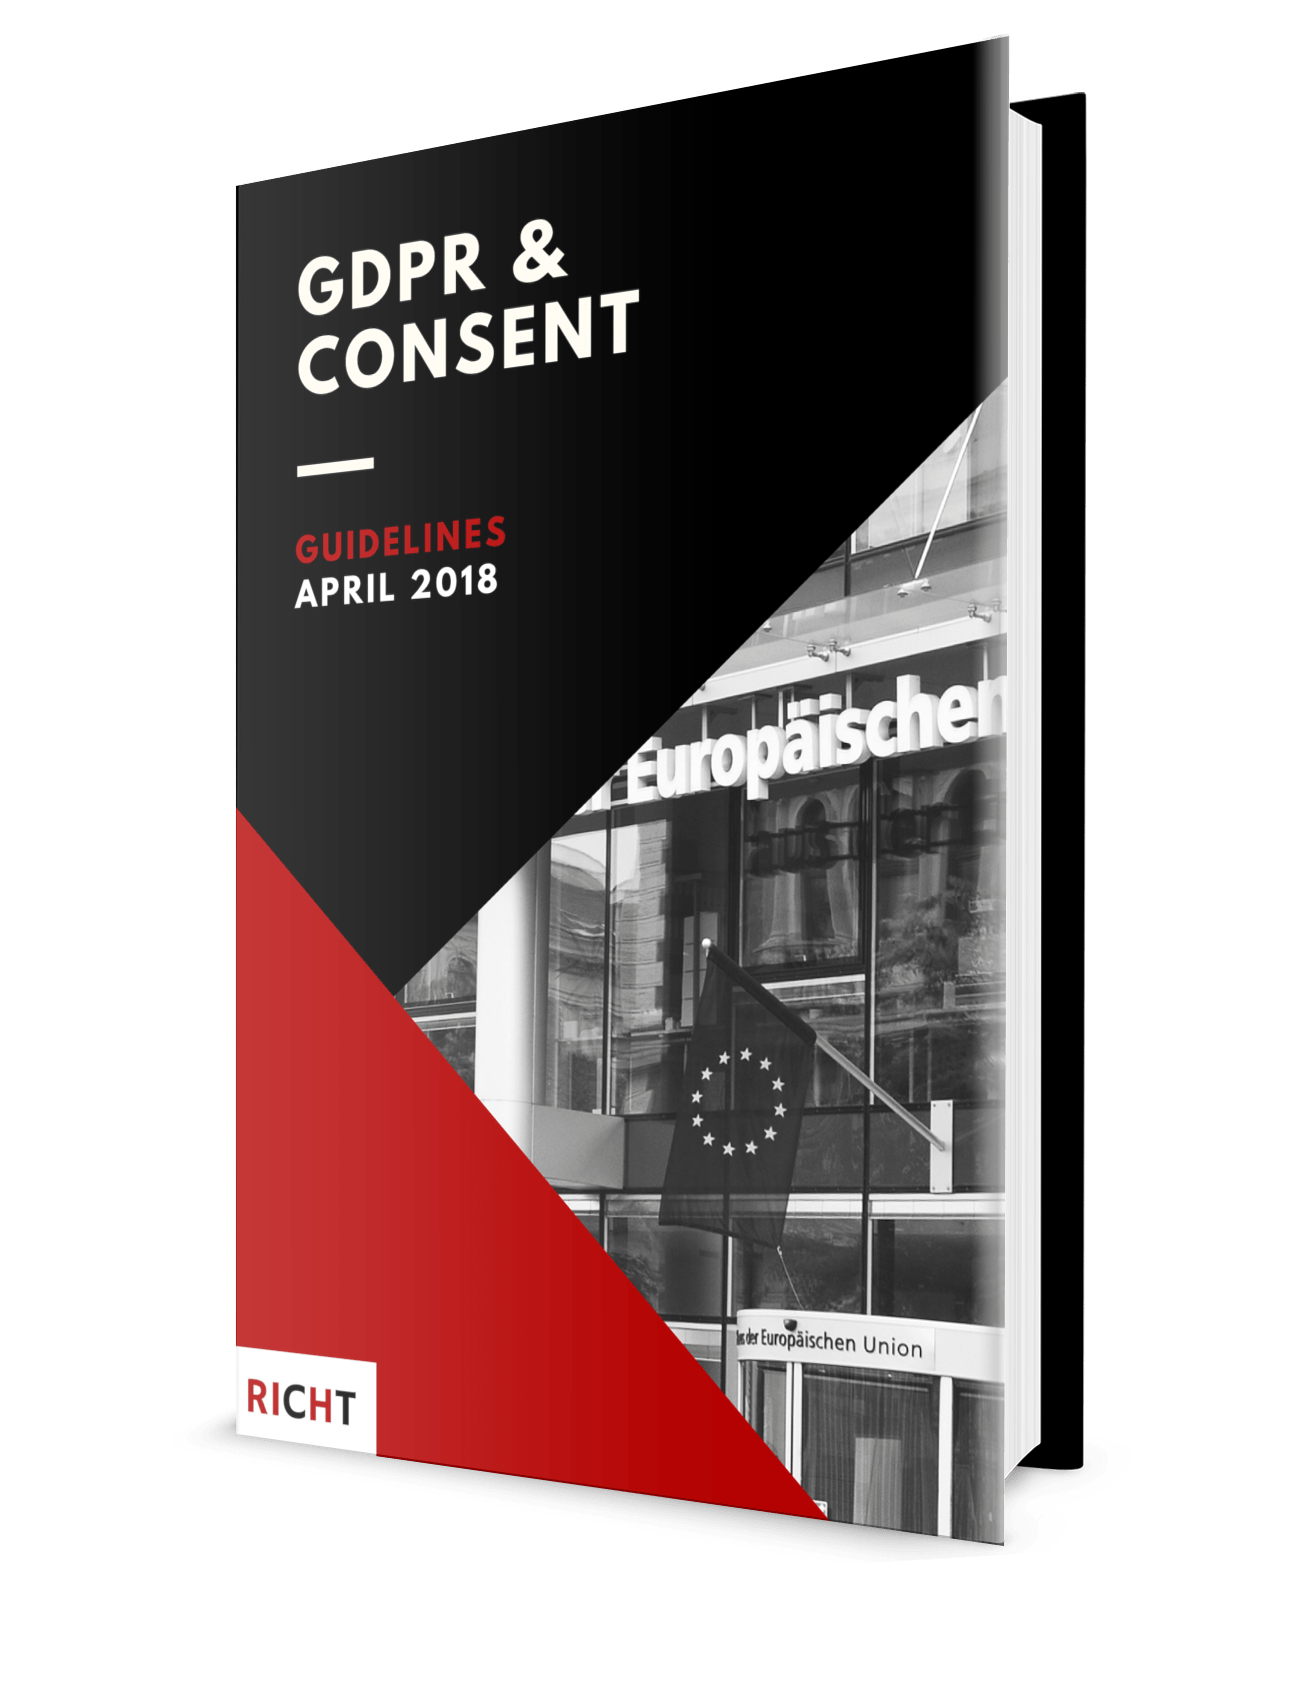 Read the guidelines explaining what constitutes consent under the GDPR. 